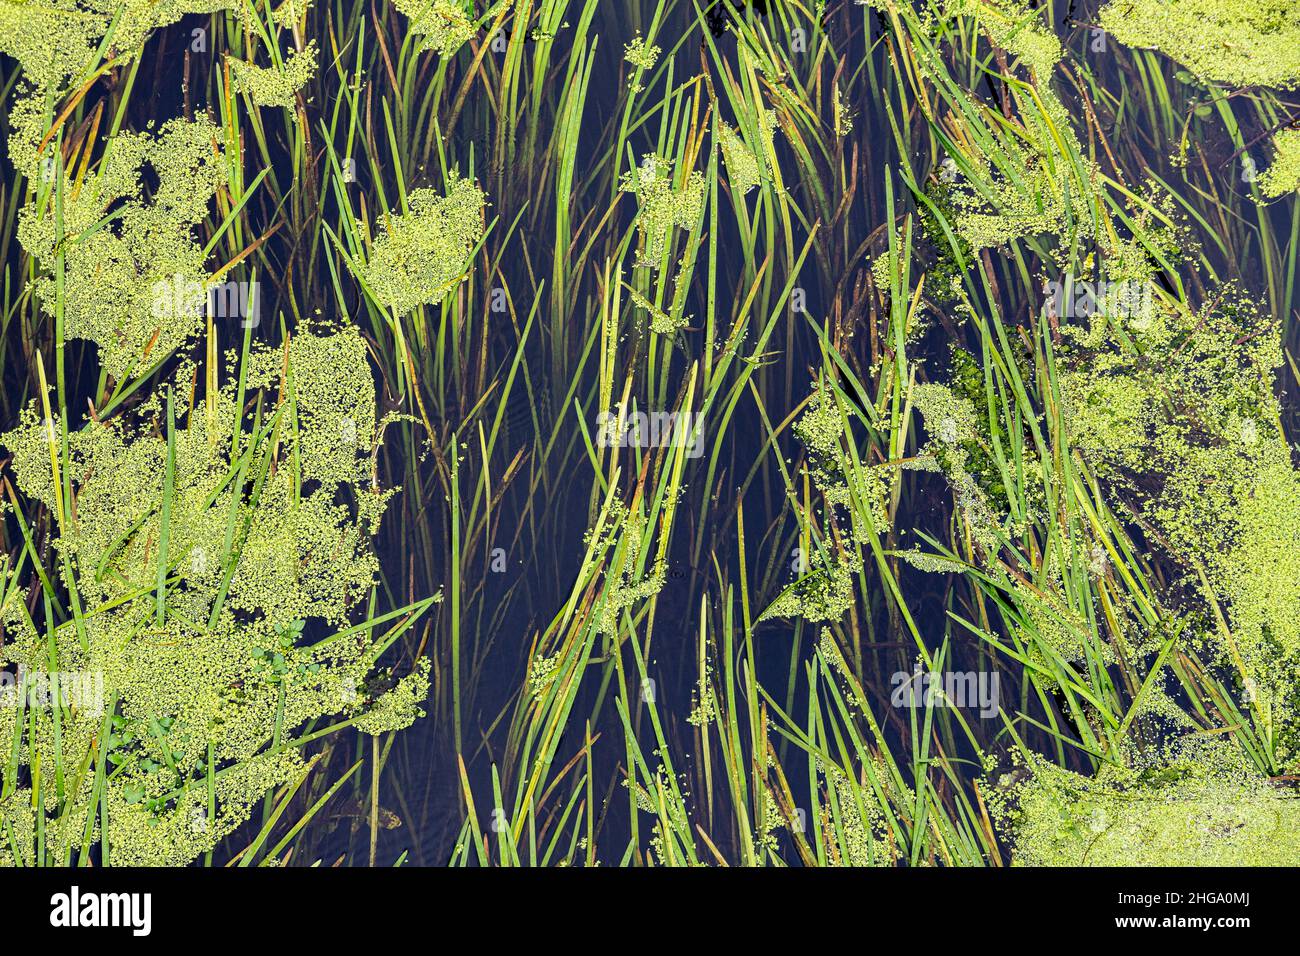 Reeds and pond weed growing in the River Torne near Doncaster, Yorkshire UK Stock Photo